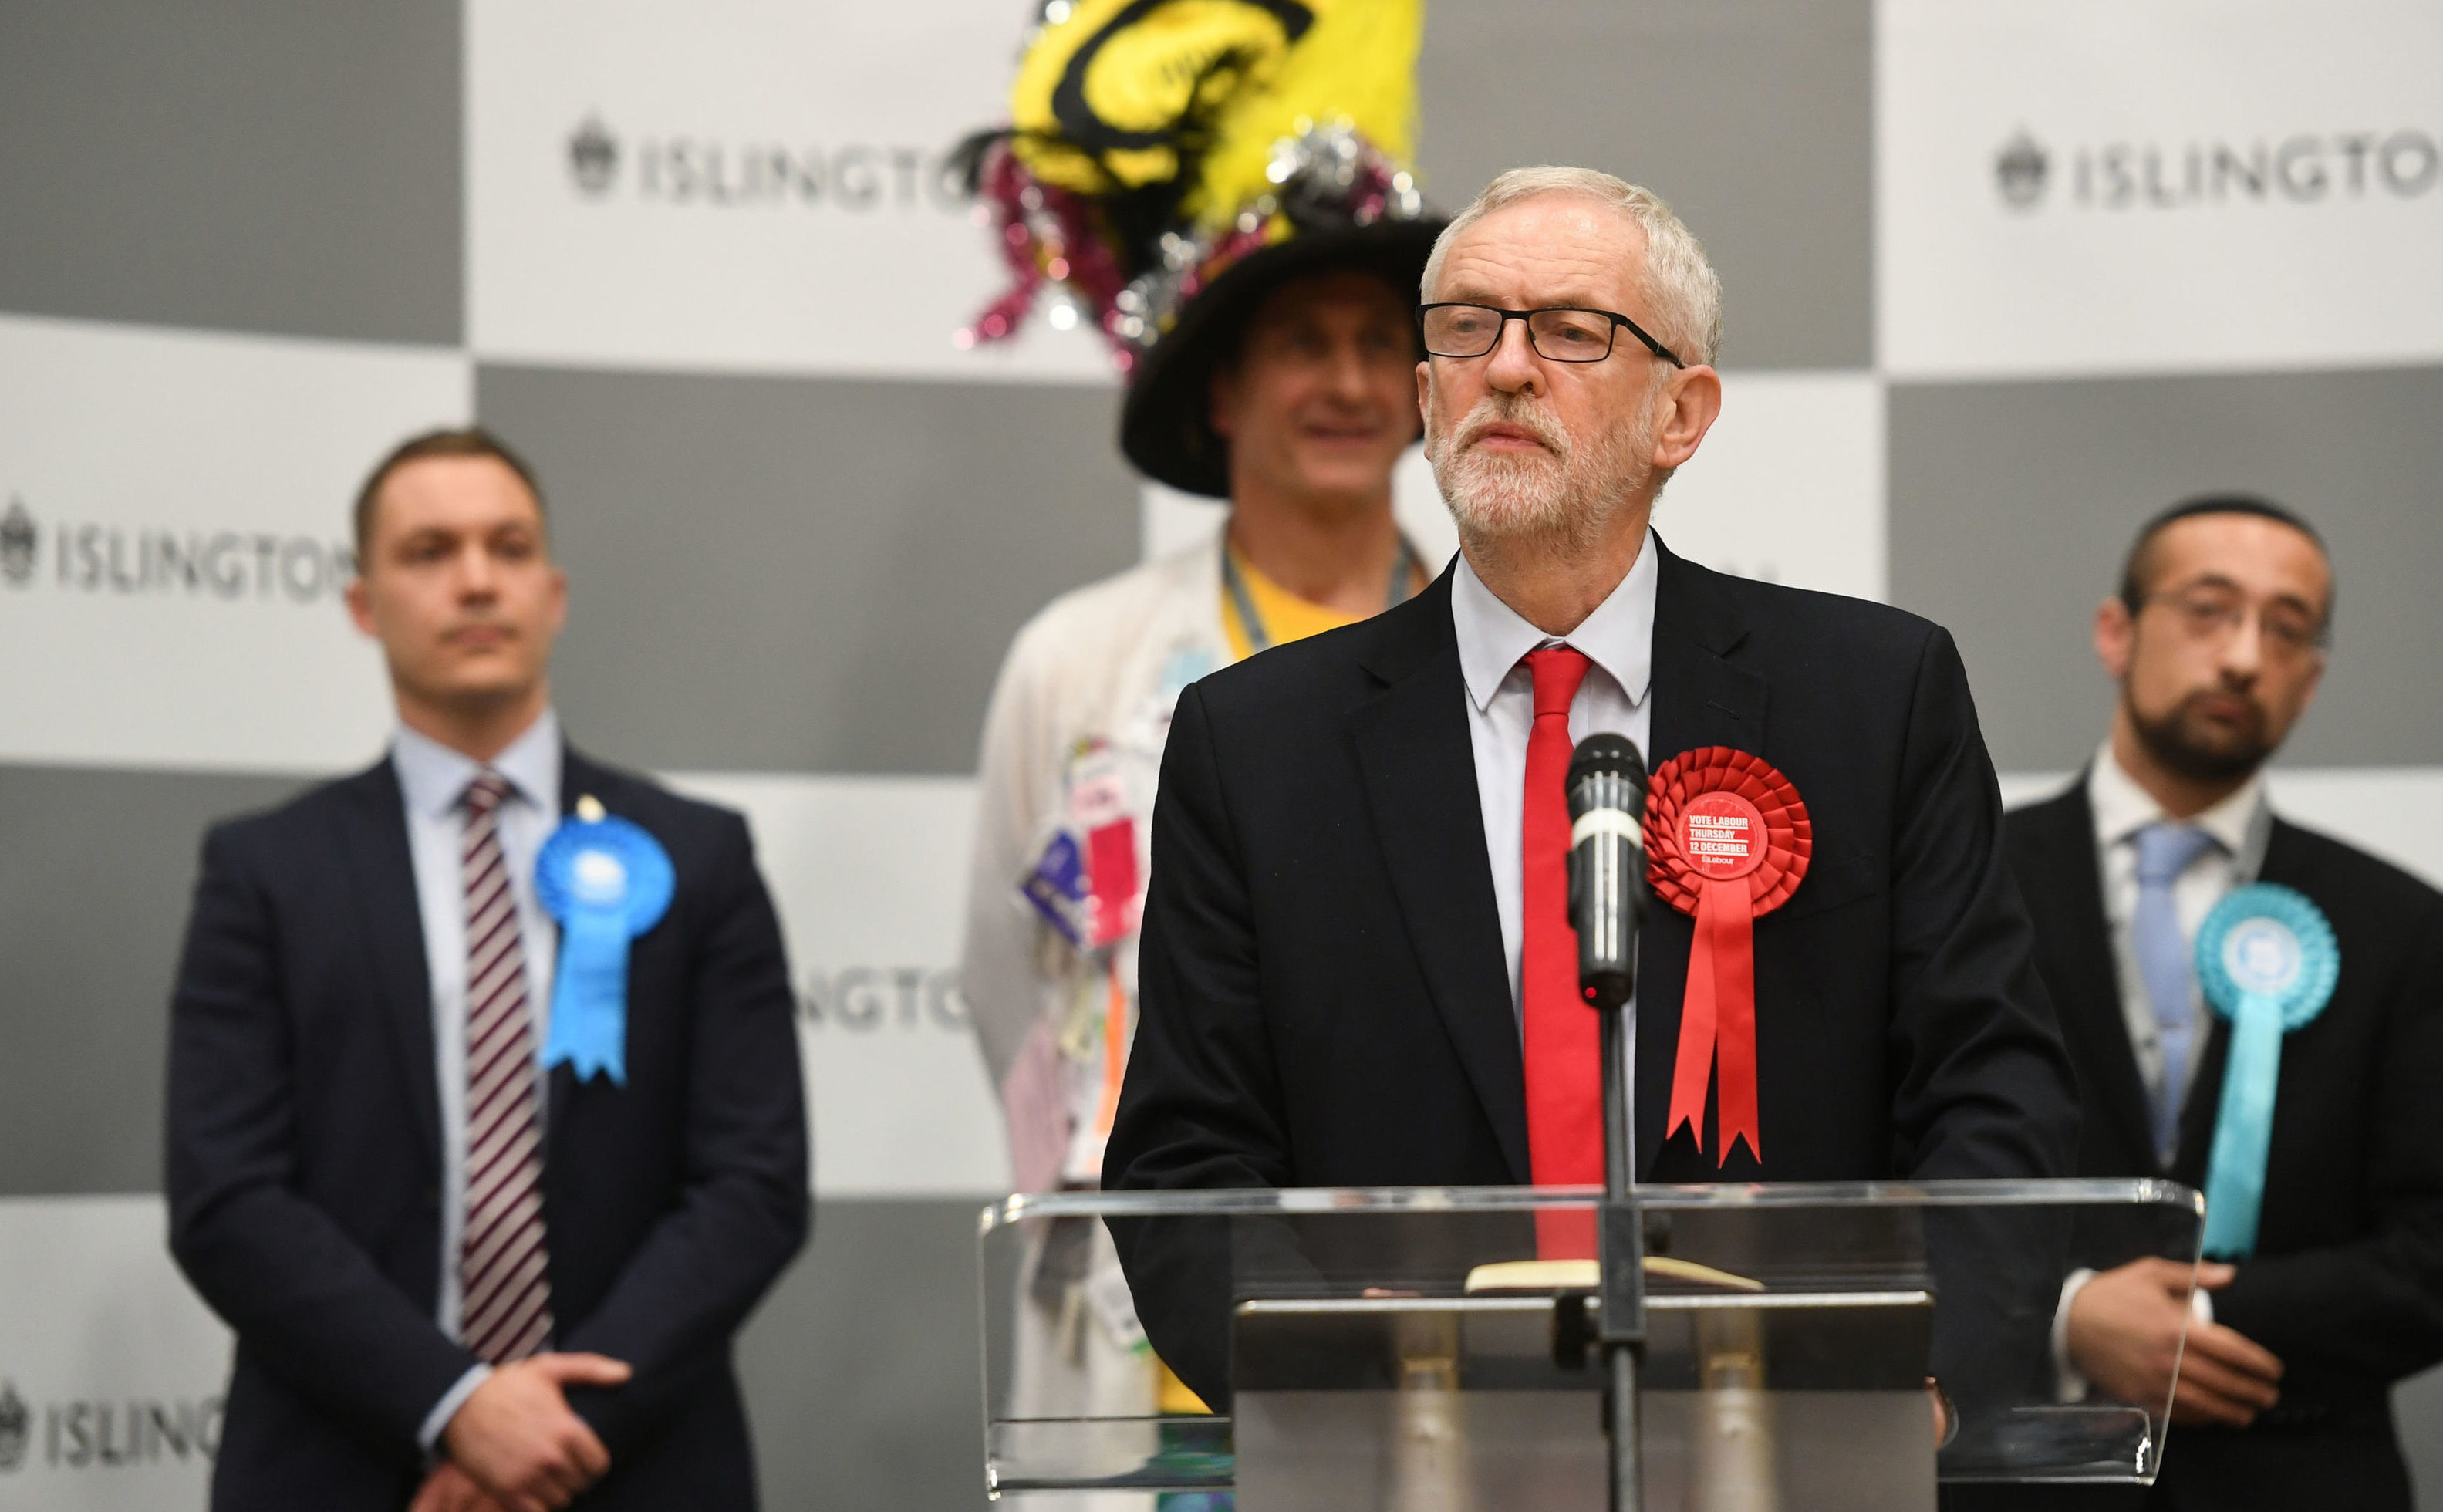 Labour leader Jeremy Corbyn announced he'd step down following the party's disastrous election results